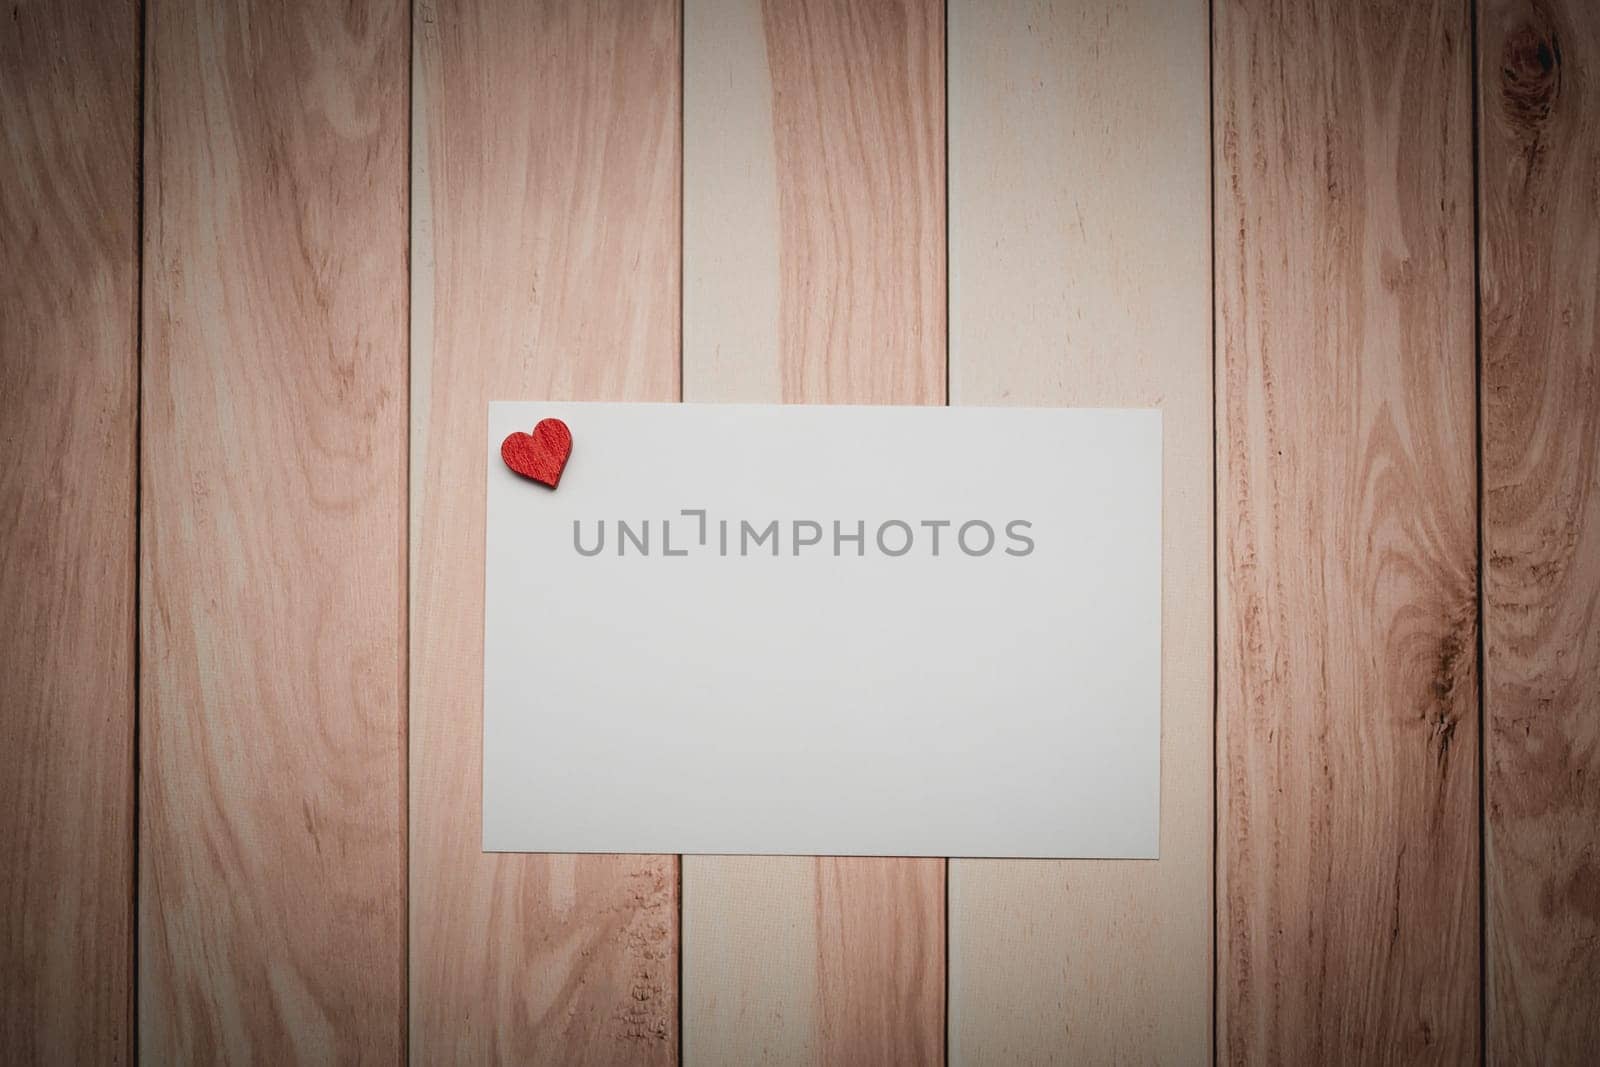 A white paper with a red heart placed on a wooden table by iamnoonmai